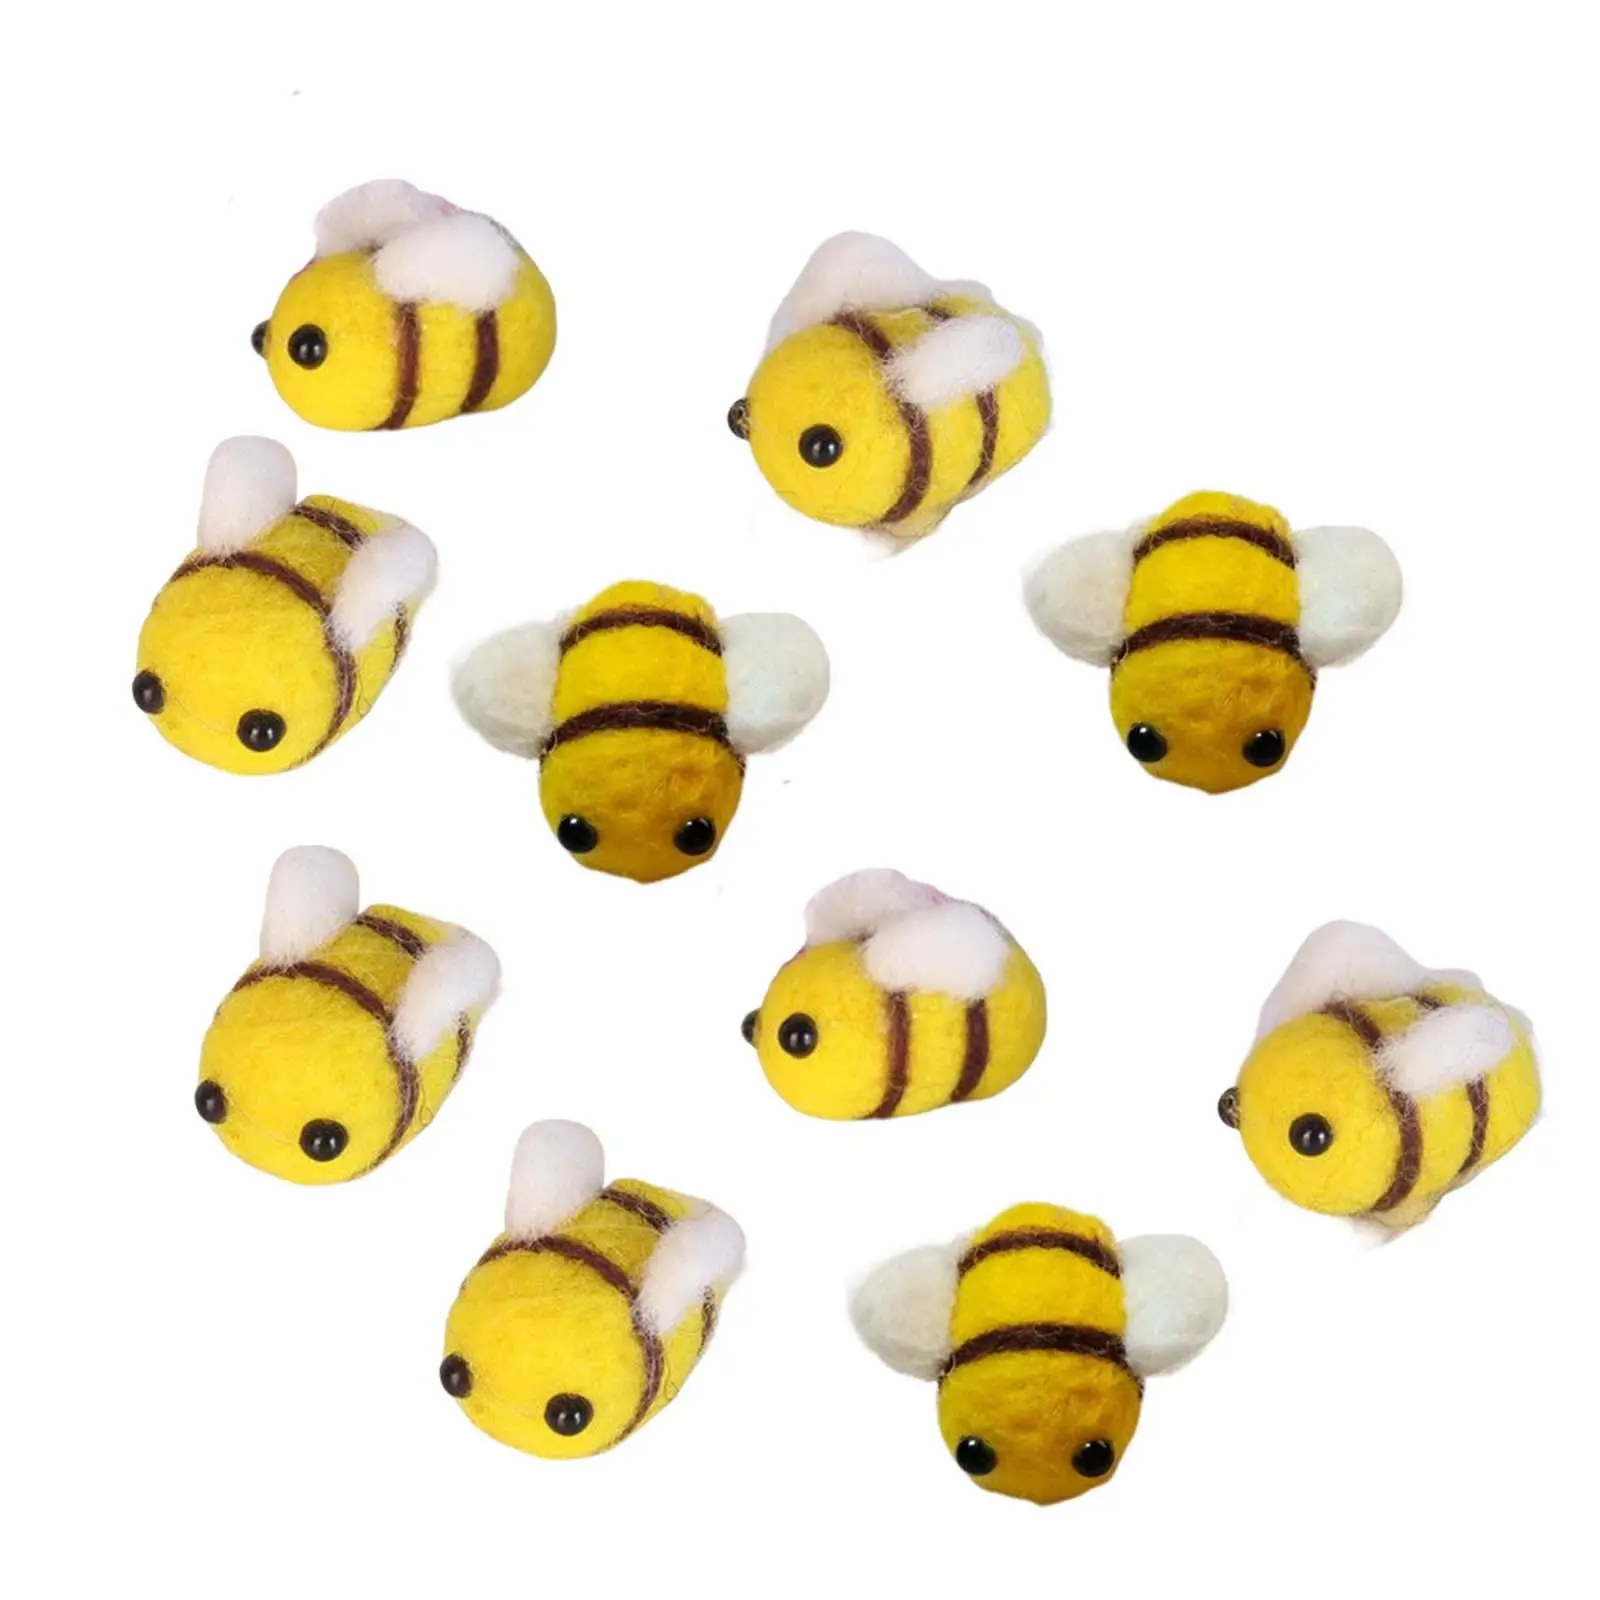 10Pcs Bumble Bee Ornament Needle Felted Bees Decortaive DIY Crafts for Baby Clothing Hair Clips Baby Shower Nursery Decoration